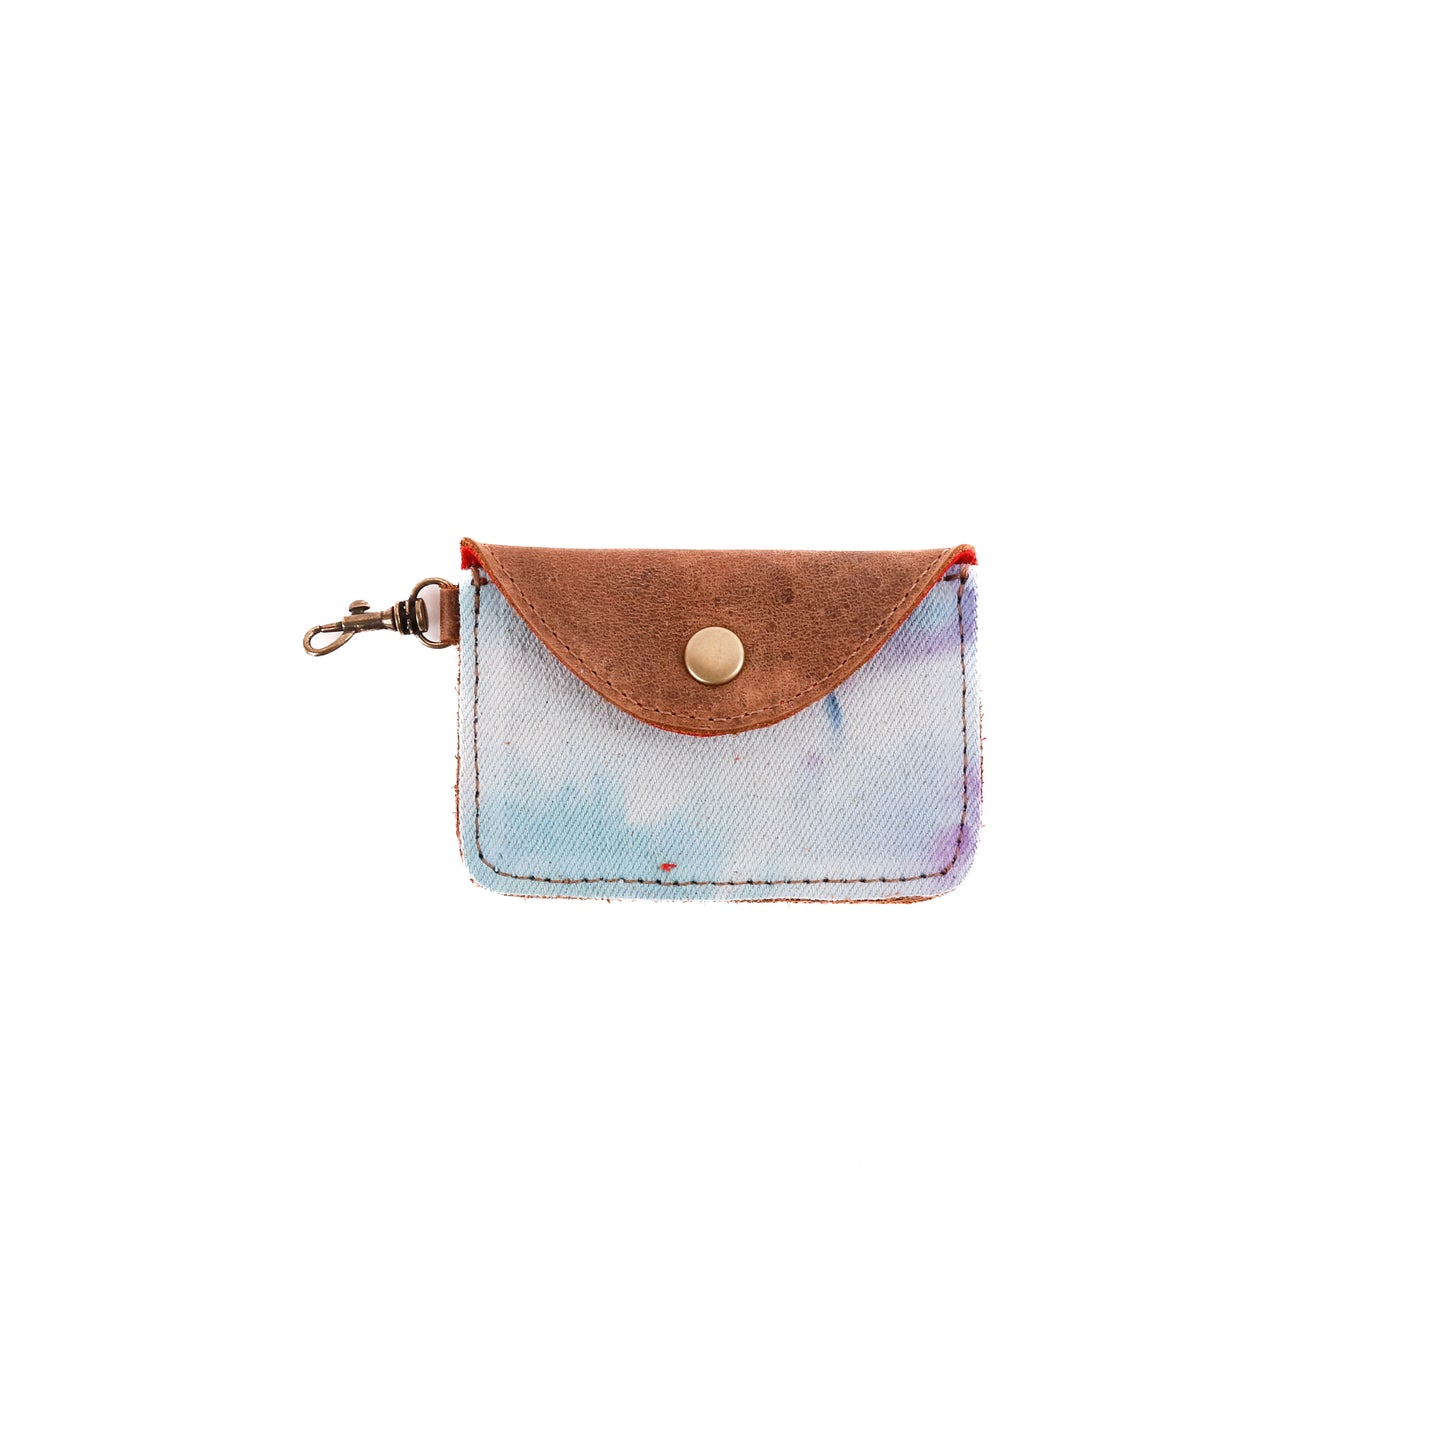 CARD WALLET - TIE DYE - UPCYCLED DENIM - CAOBA LEATHER - NO. 10002